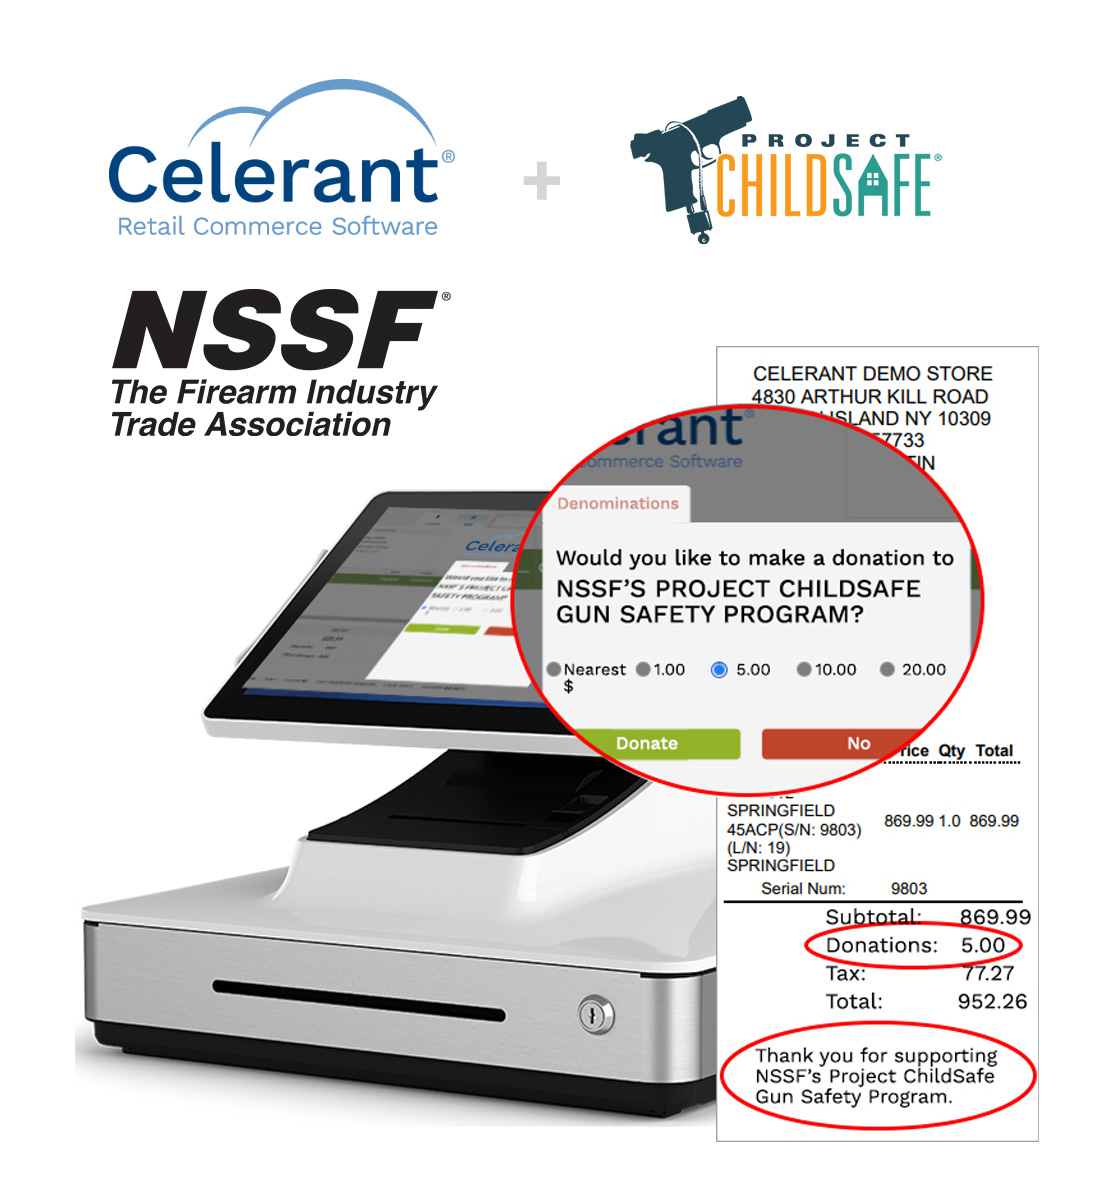 Celerant, the NSSF and Project ChildSafe